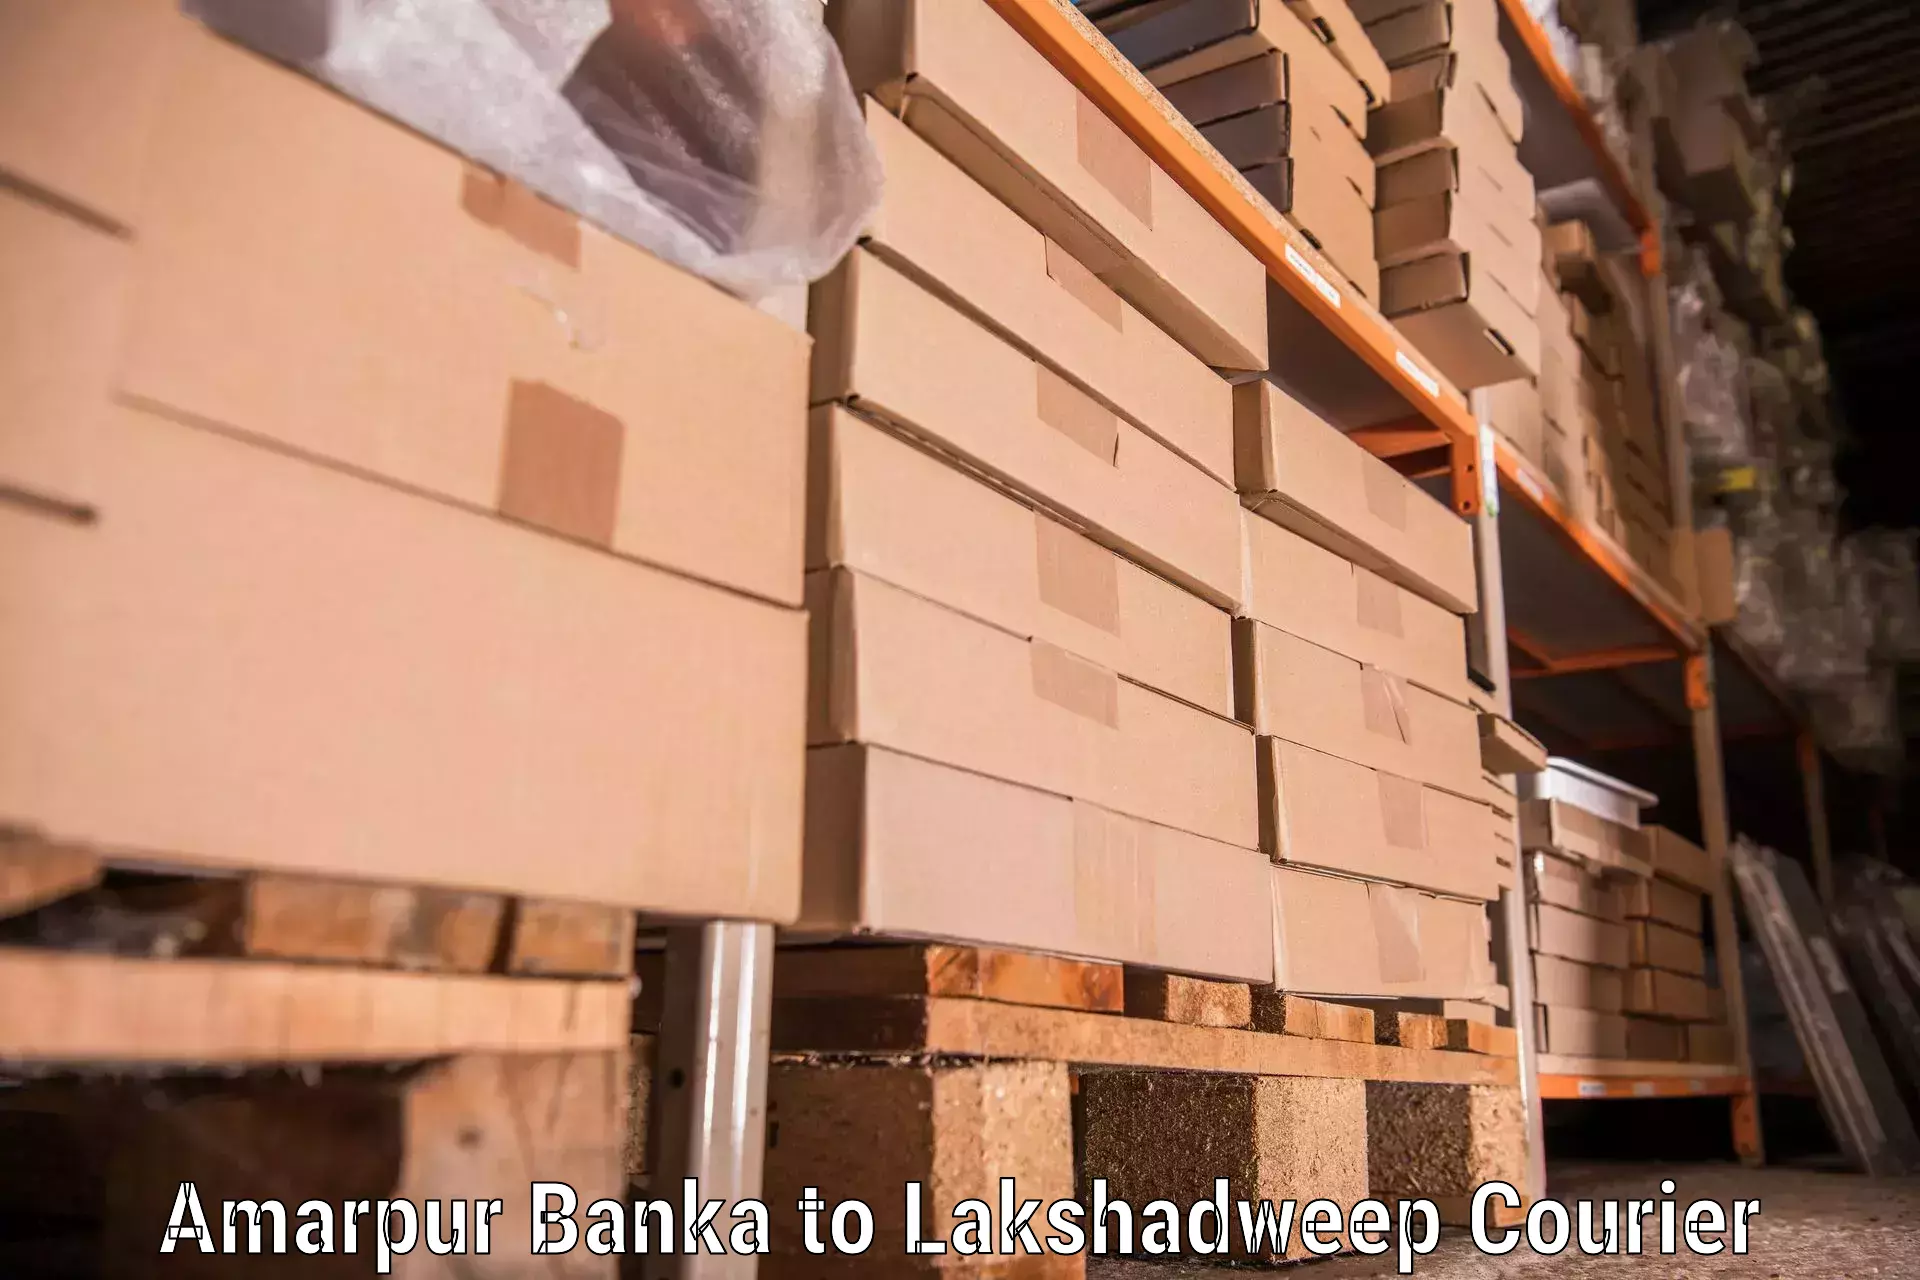 Long-distance moving services in Amarpur Banka to Lakshadweep